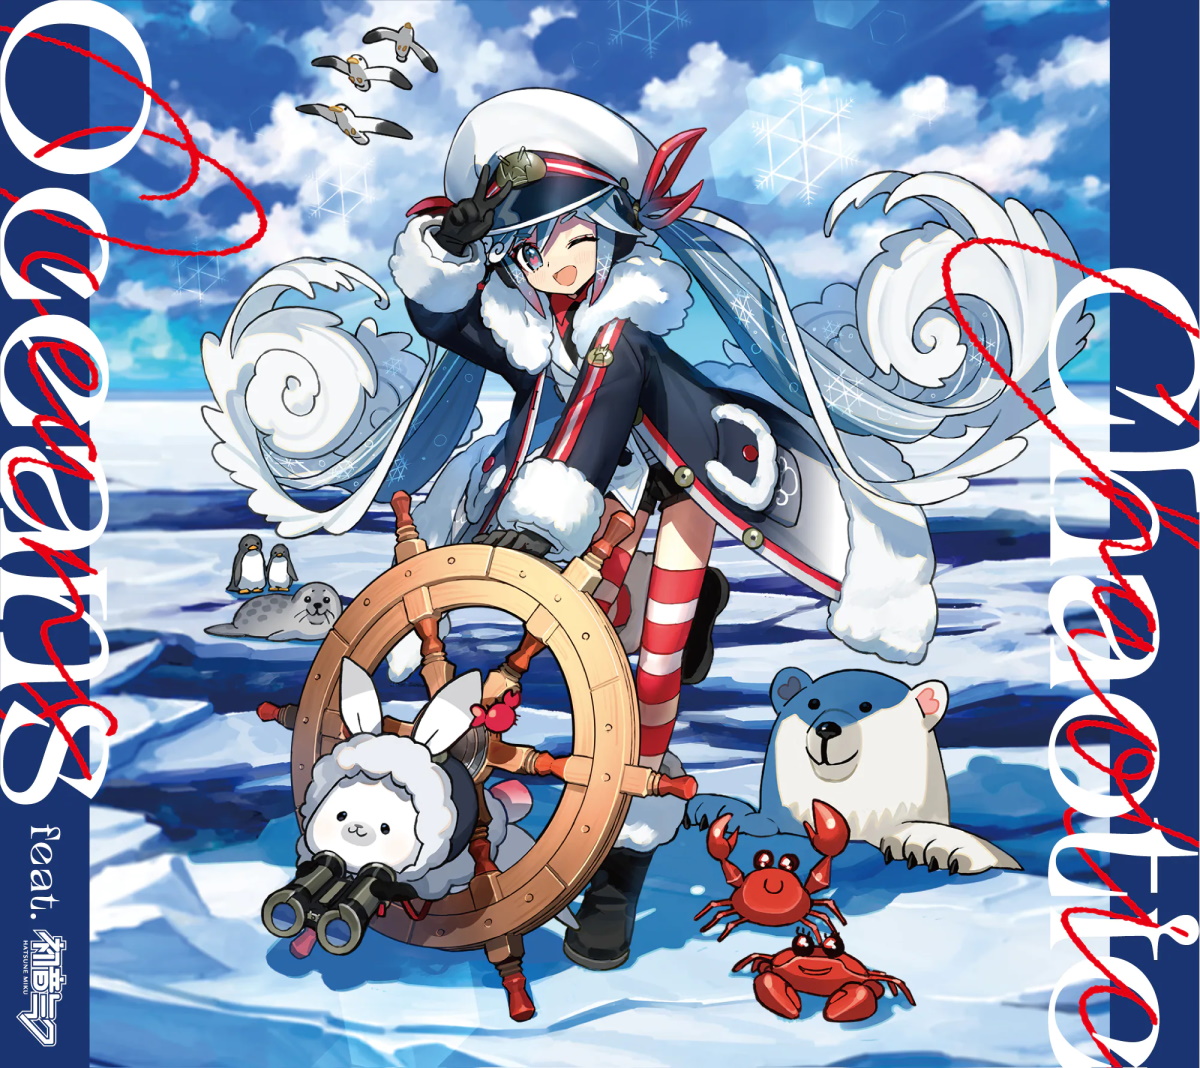 Cover art for『ATOLS - Nami no Hana』from the release『Chaotic Oceans feat. Hatsune Miku』